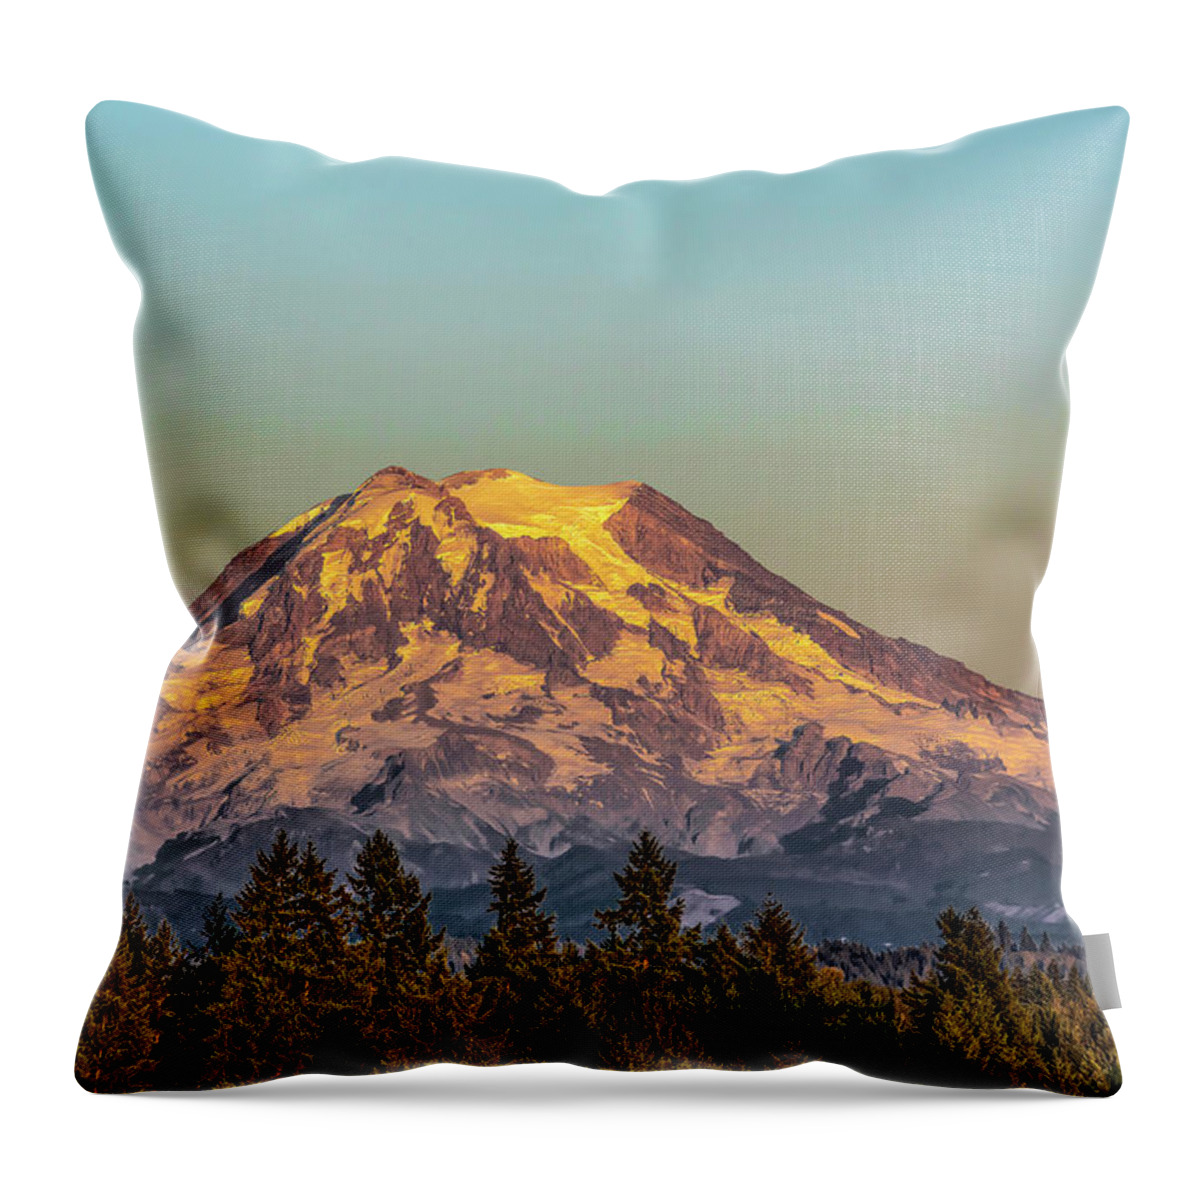 Mt. Rainer Throw Pillow featuring the photograph Mt. Rainer Sunset by James Menzies